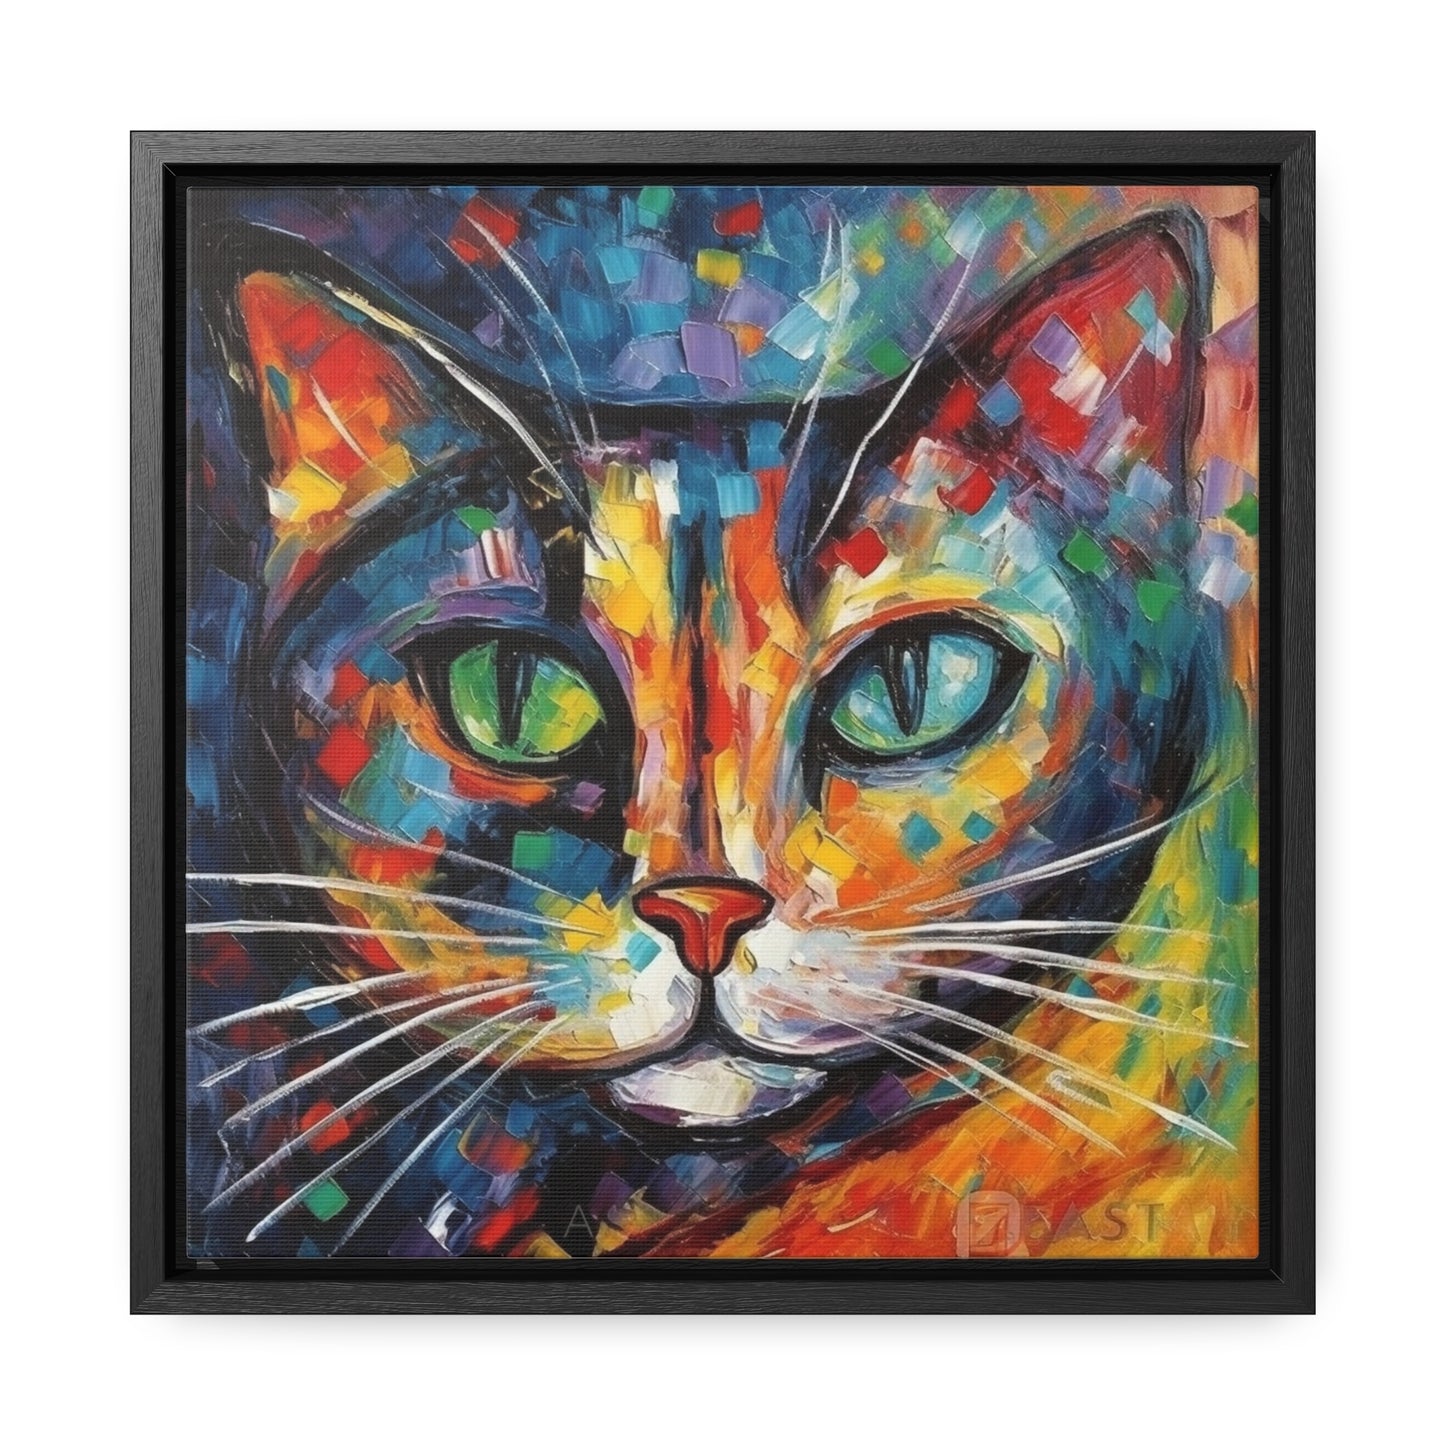 Cat 132, Gallery Canvas Wraps, Square Frame